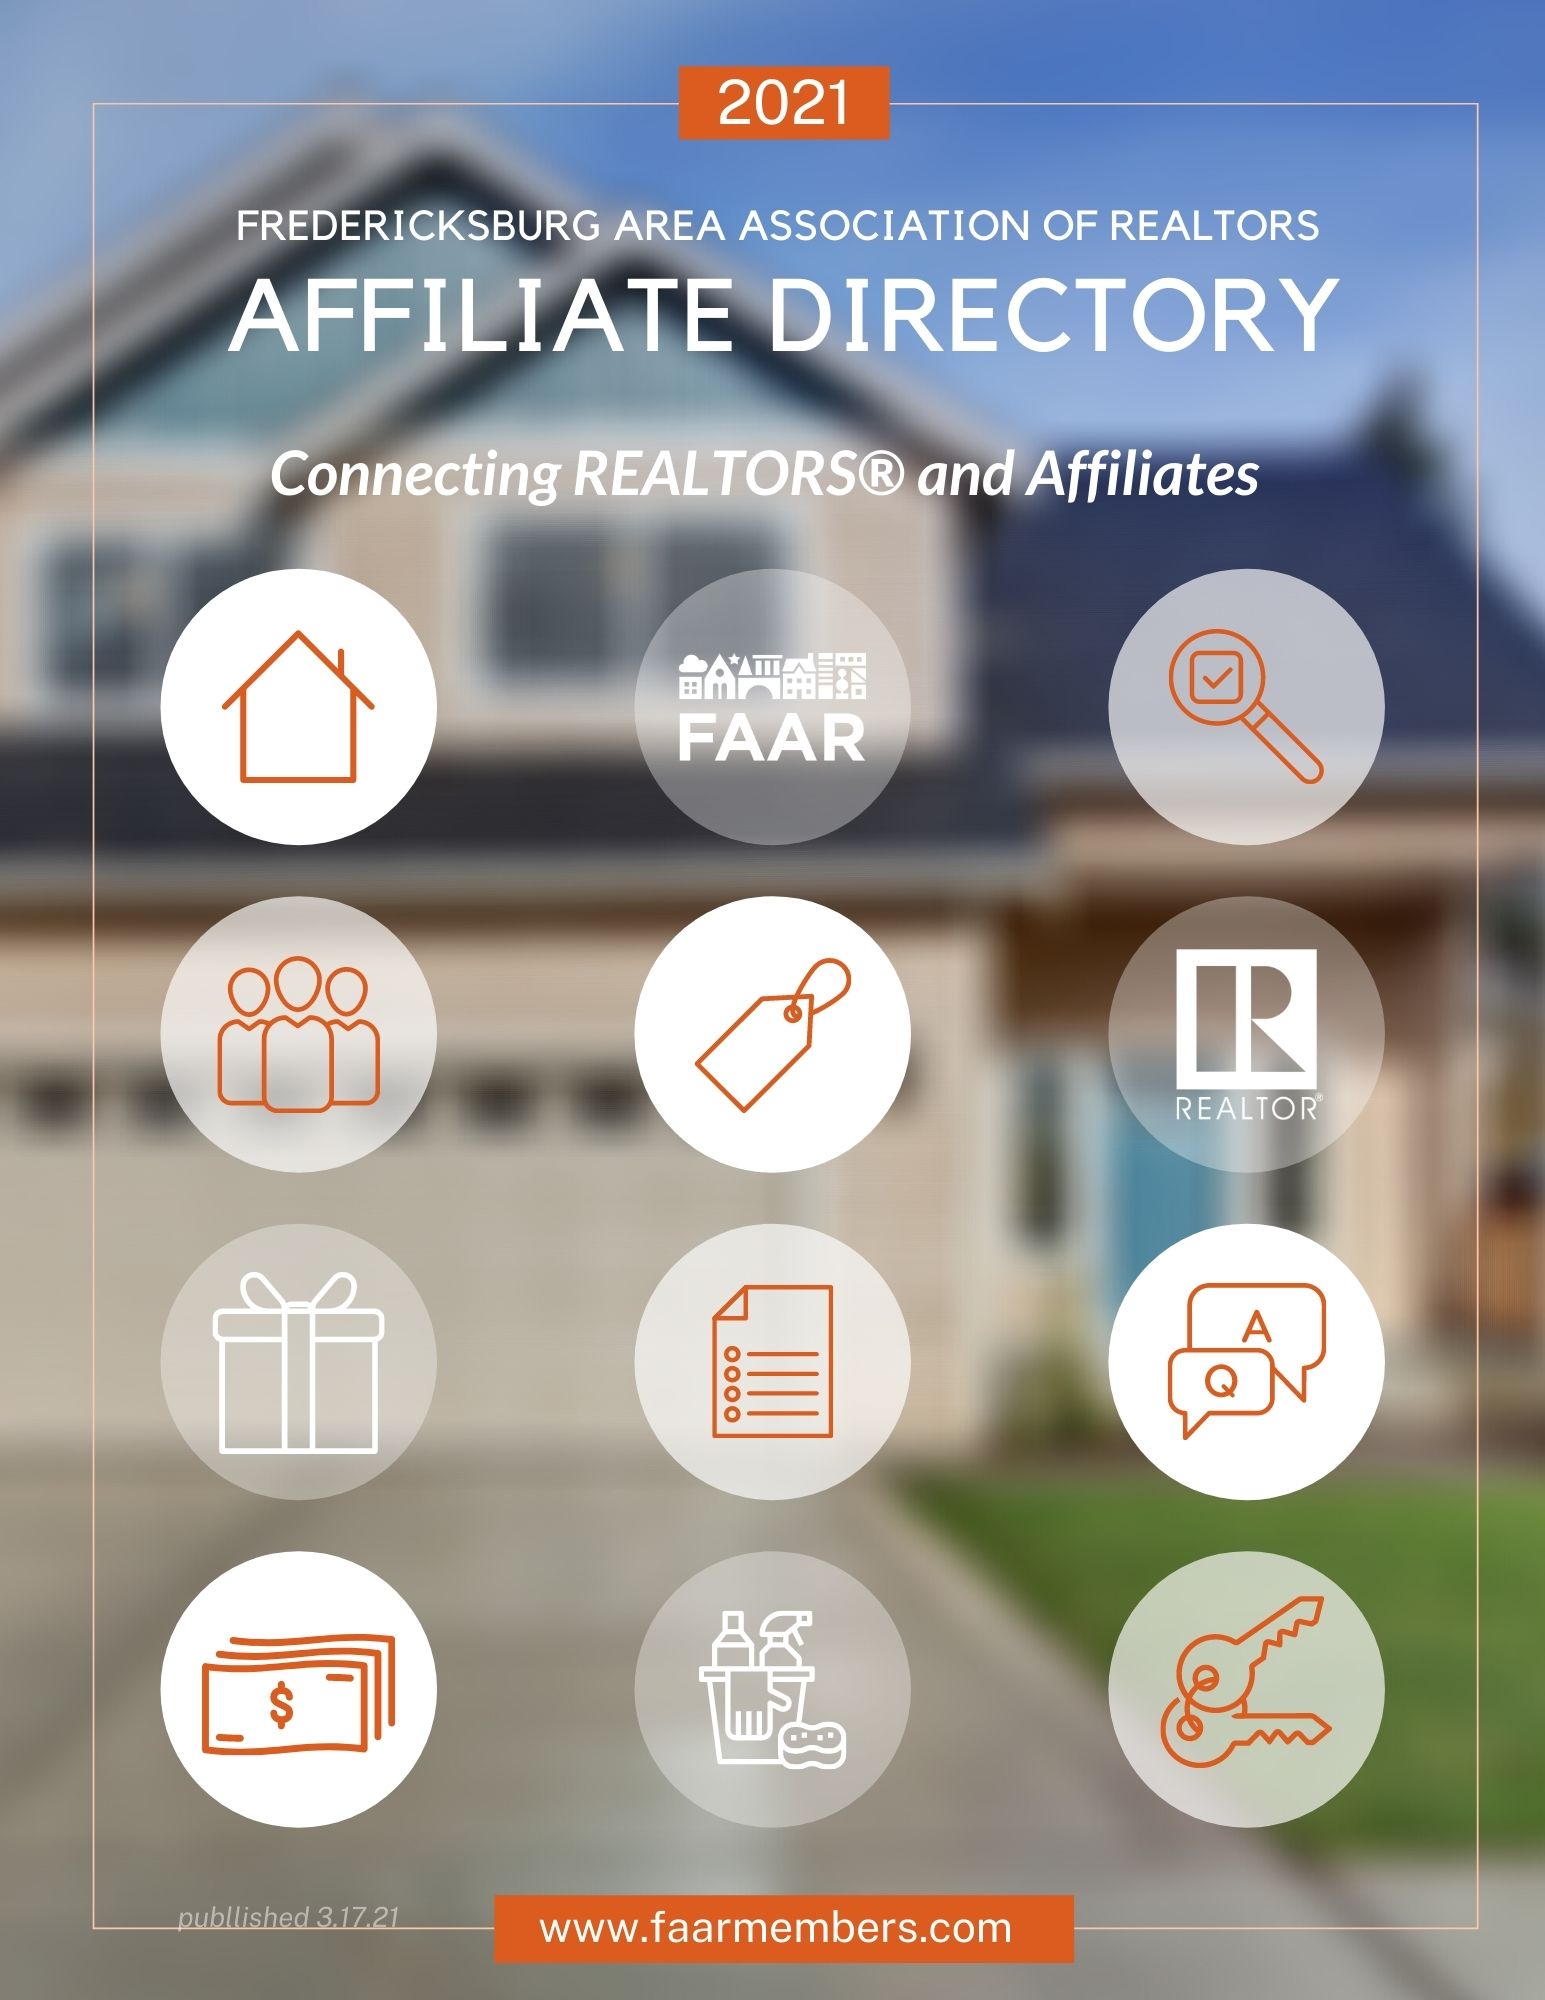 icons of realtor services are laid out in a grid over a blurred home titled 2021 fredericksburg area association of realtors affiliate directory connecting realtors affiliates